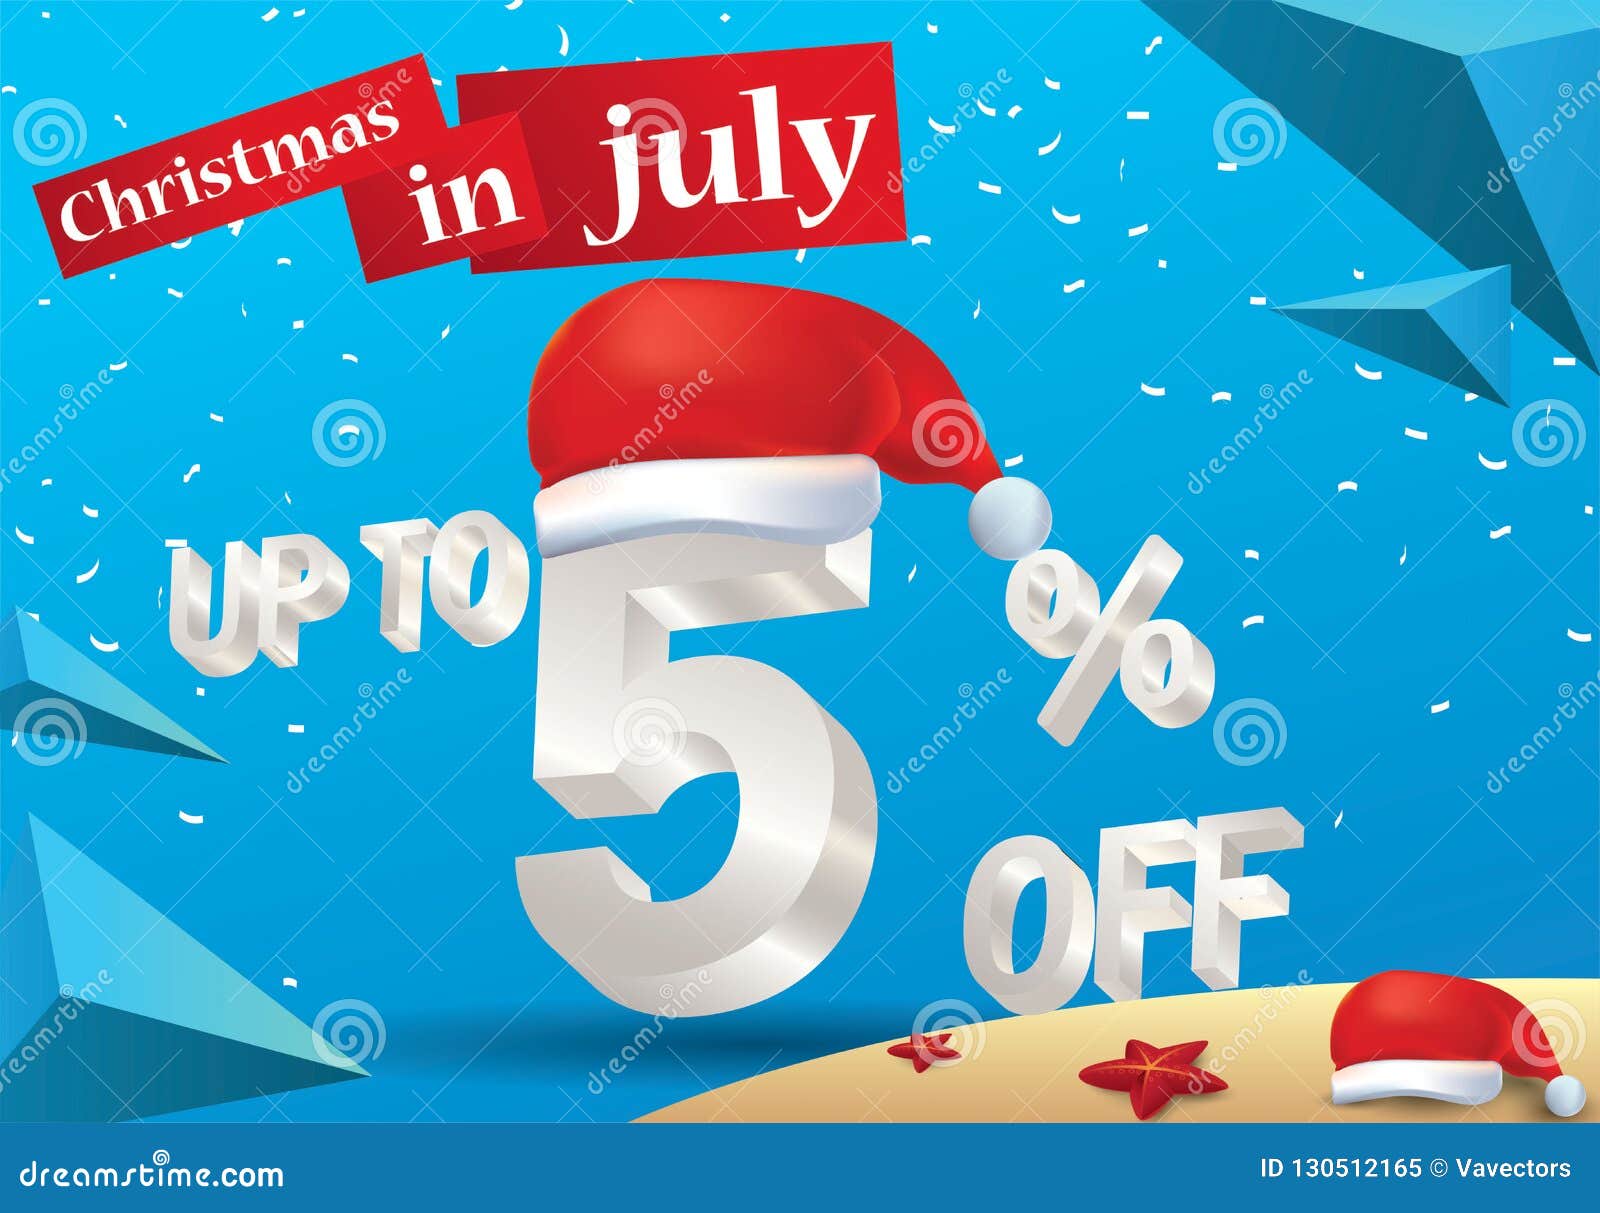 Christmas Sale in July Design with 3d Concept Stock Vector